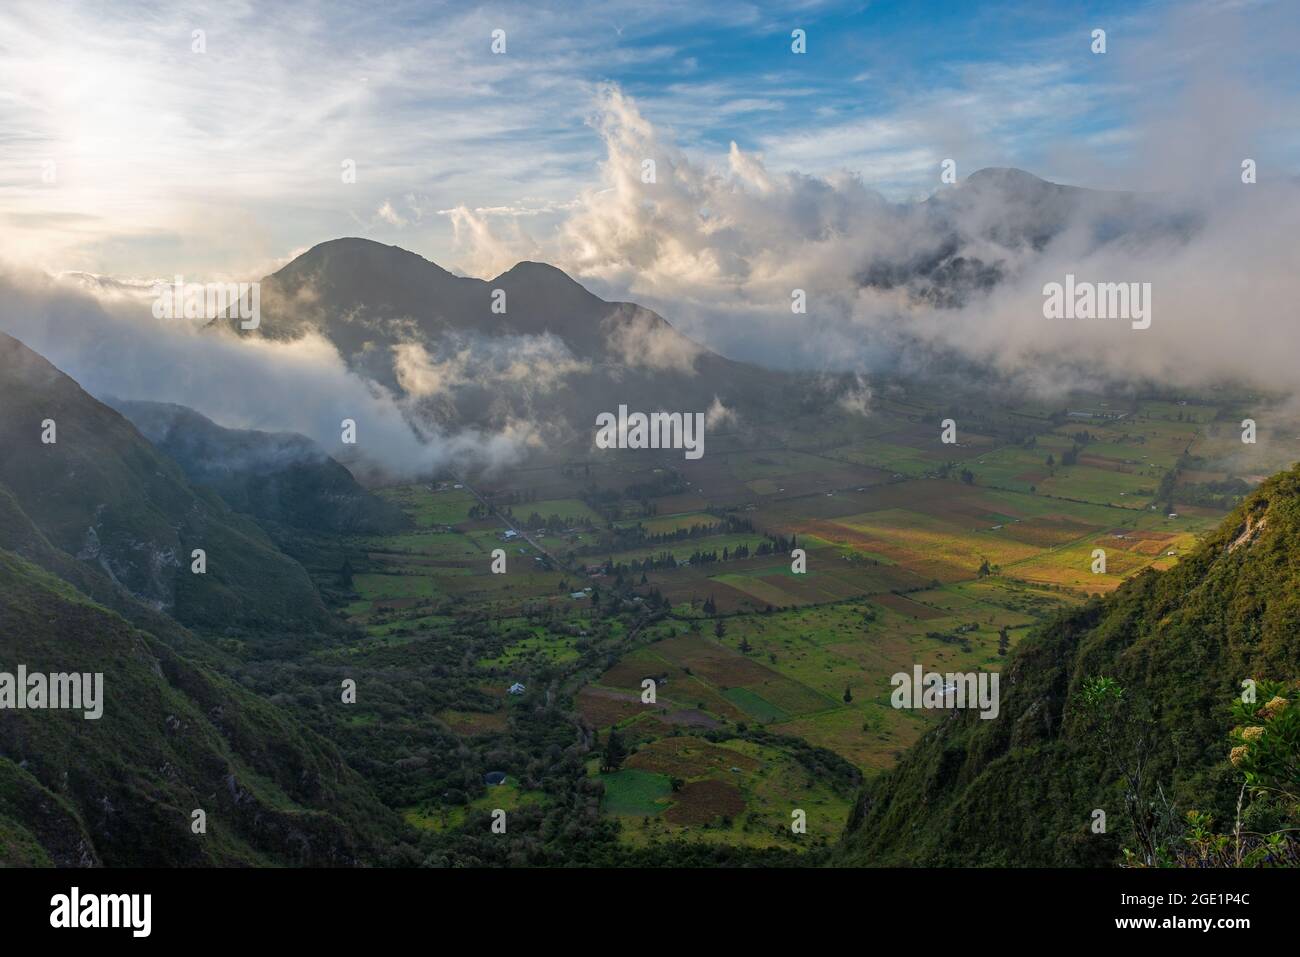 Pululahua volcanic crater with indigenous agriculture fields, Quito, Ecuador. Stock Photo